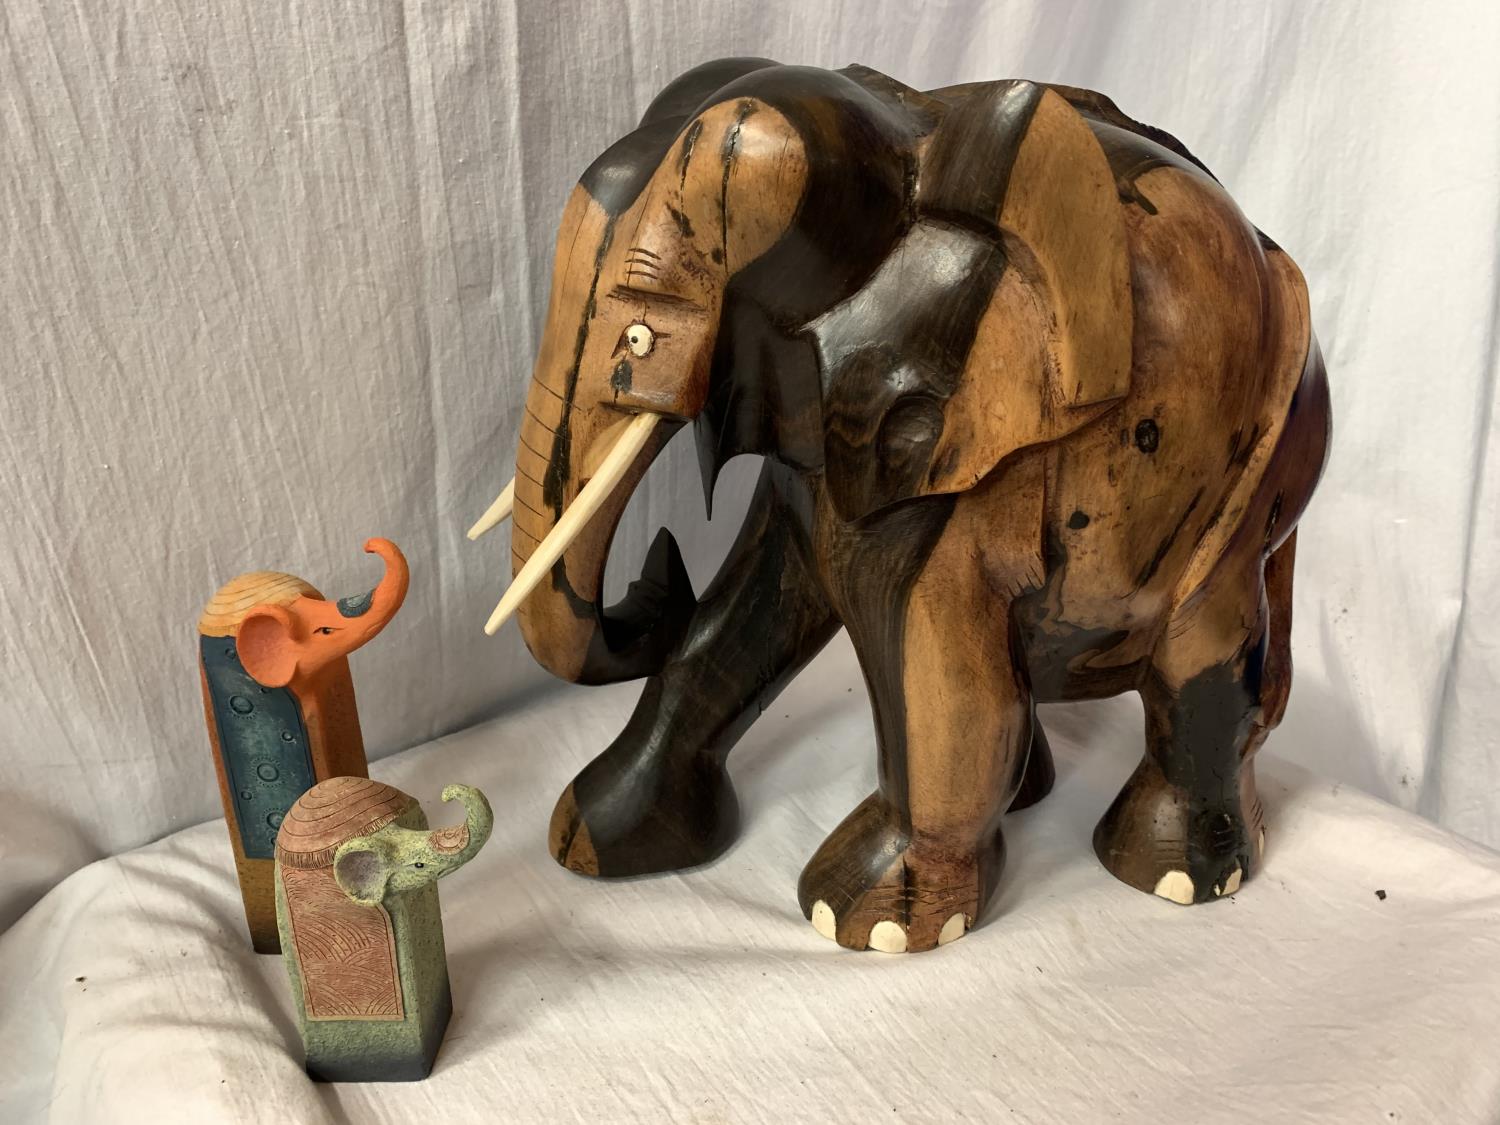 A LARGE CARVED HEAVY HARD WOOD ELEPHANT (H: APPROX. 30CM) AND TWO CERAMIC ELEPHANT ITEMS